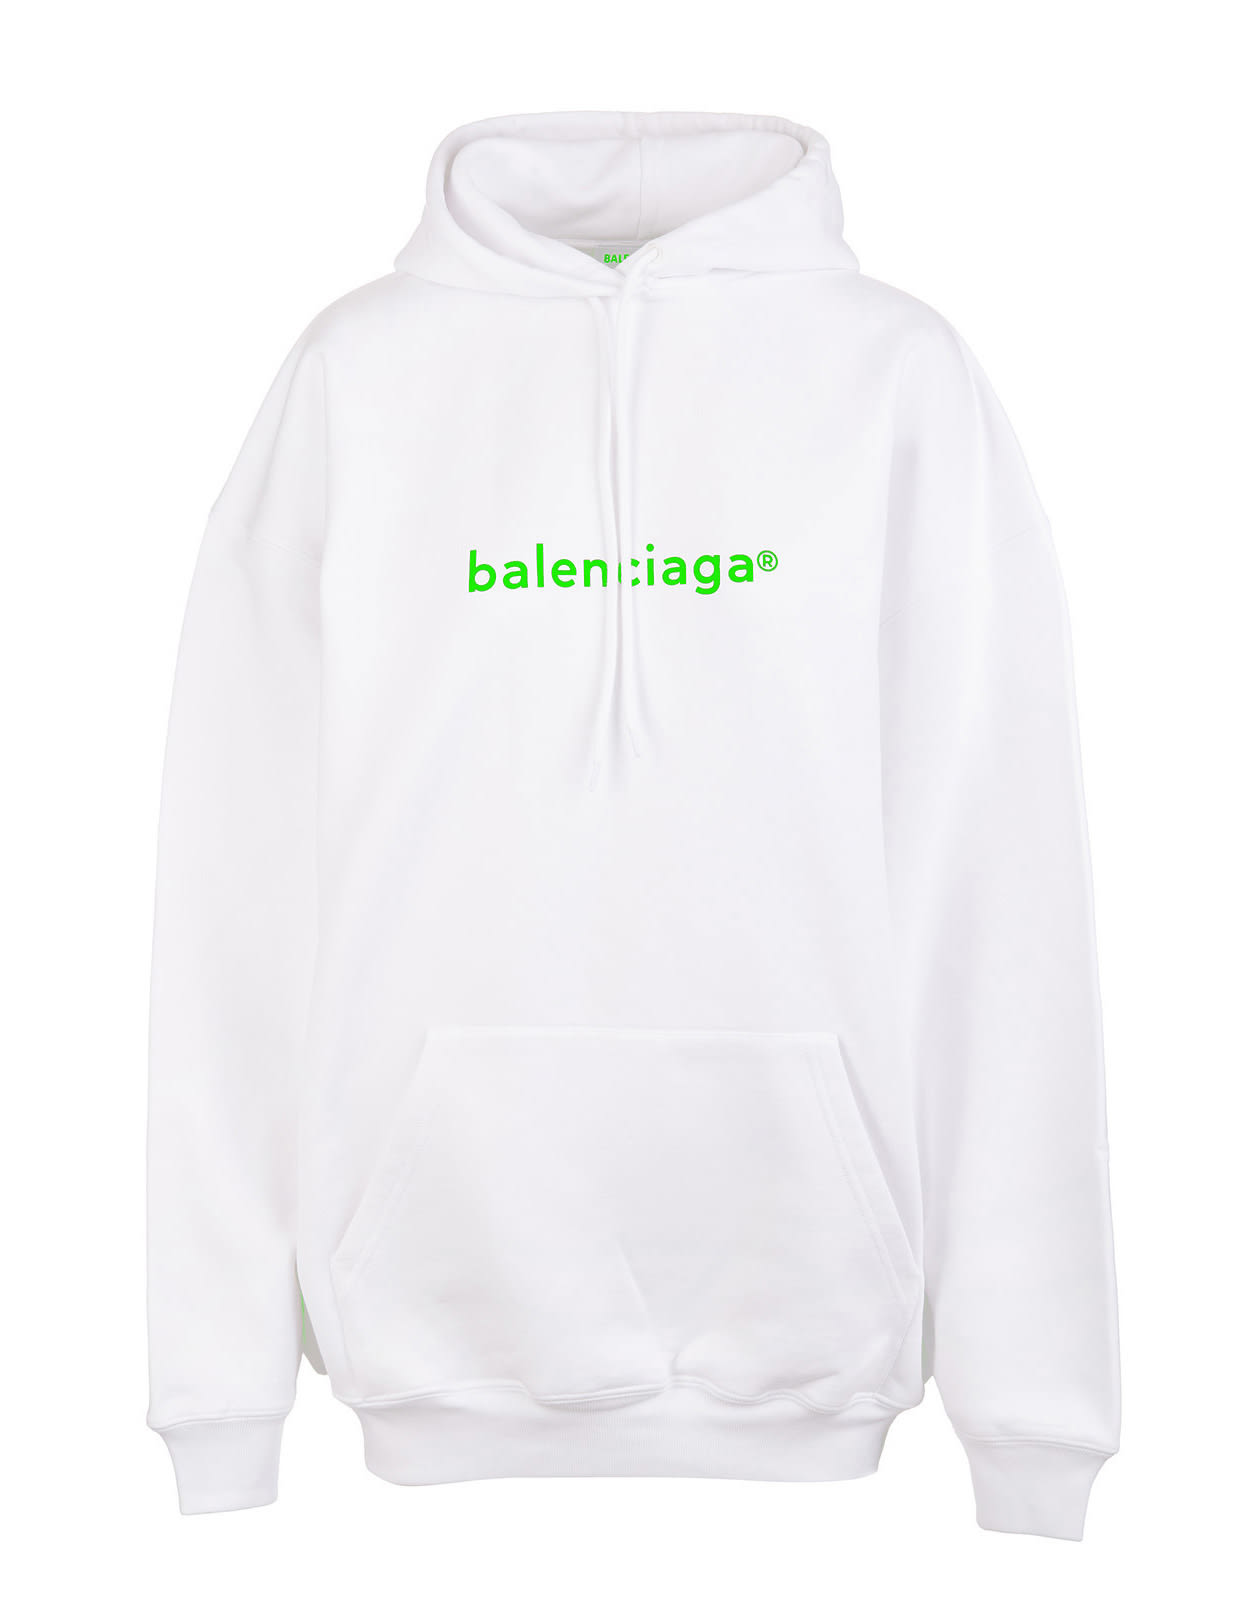 Balenciaga Unisex White And Fluo Green new Copyright Hoodie